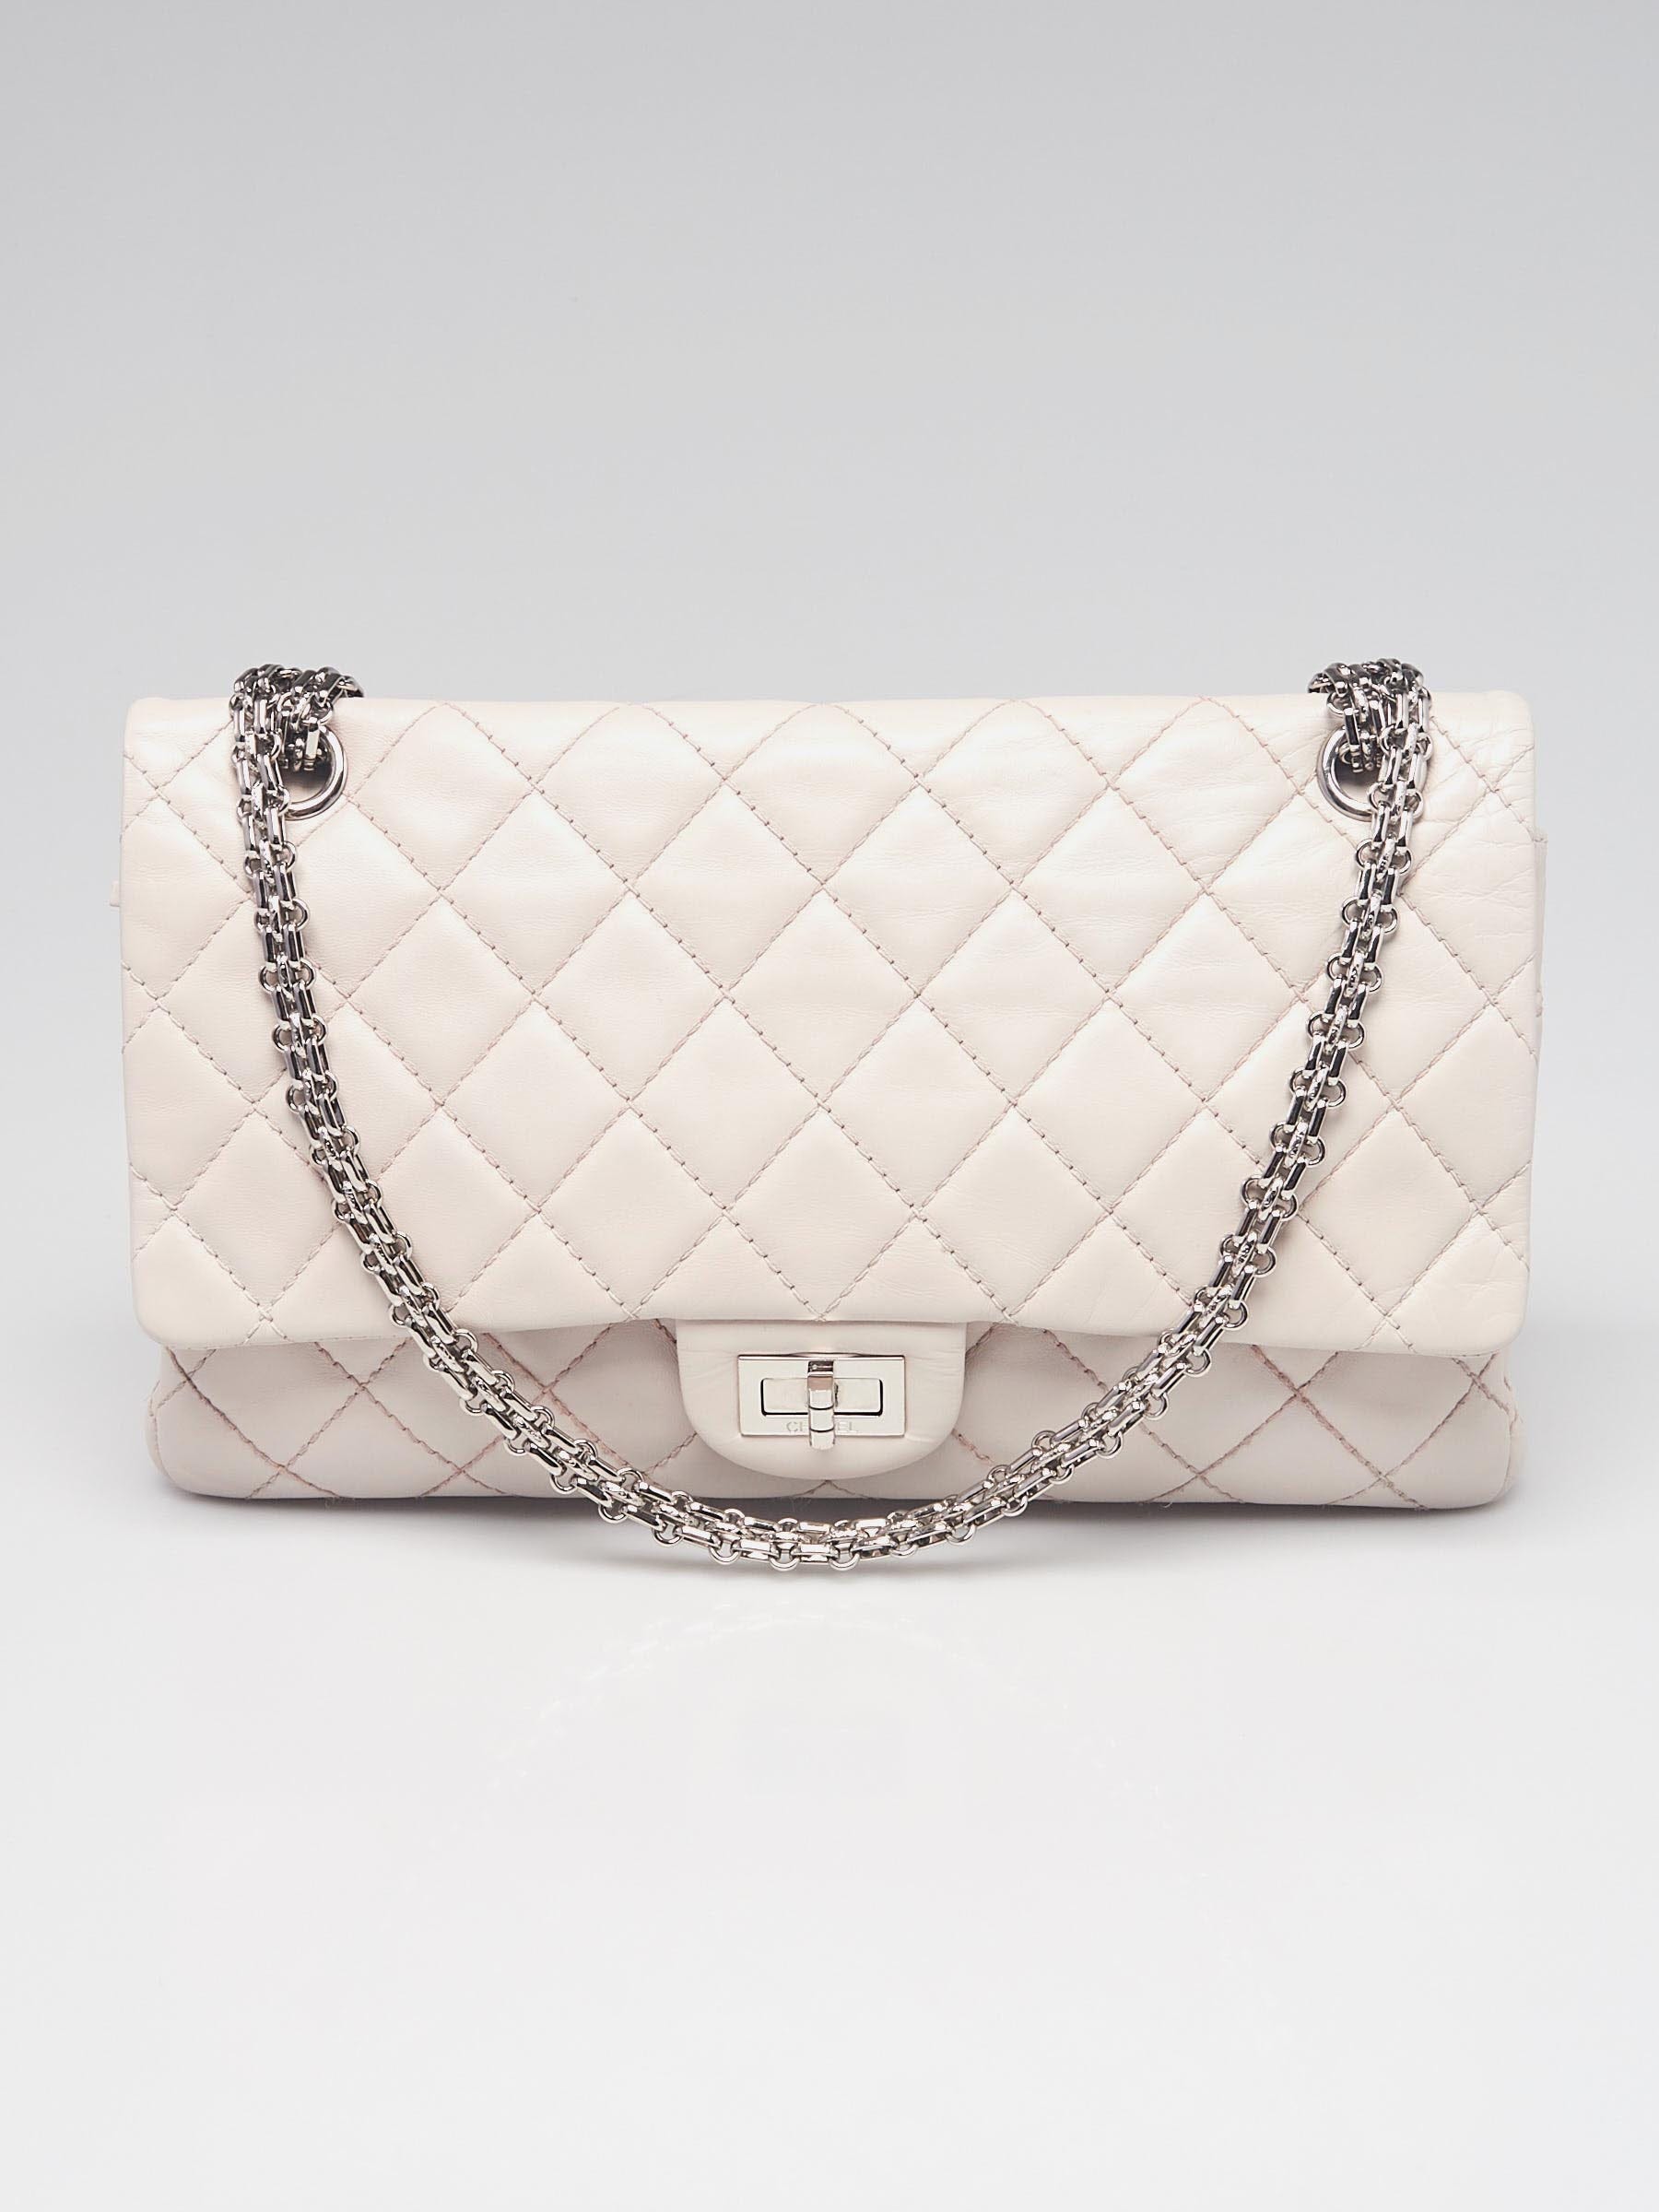 Chanel Light Pink Quilted Lambskin Leather Classic Jumbo Double Flap Bag -  Yoogi's Closet